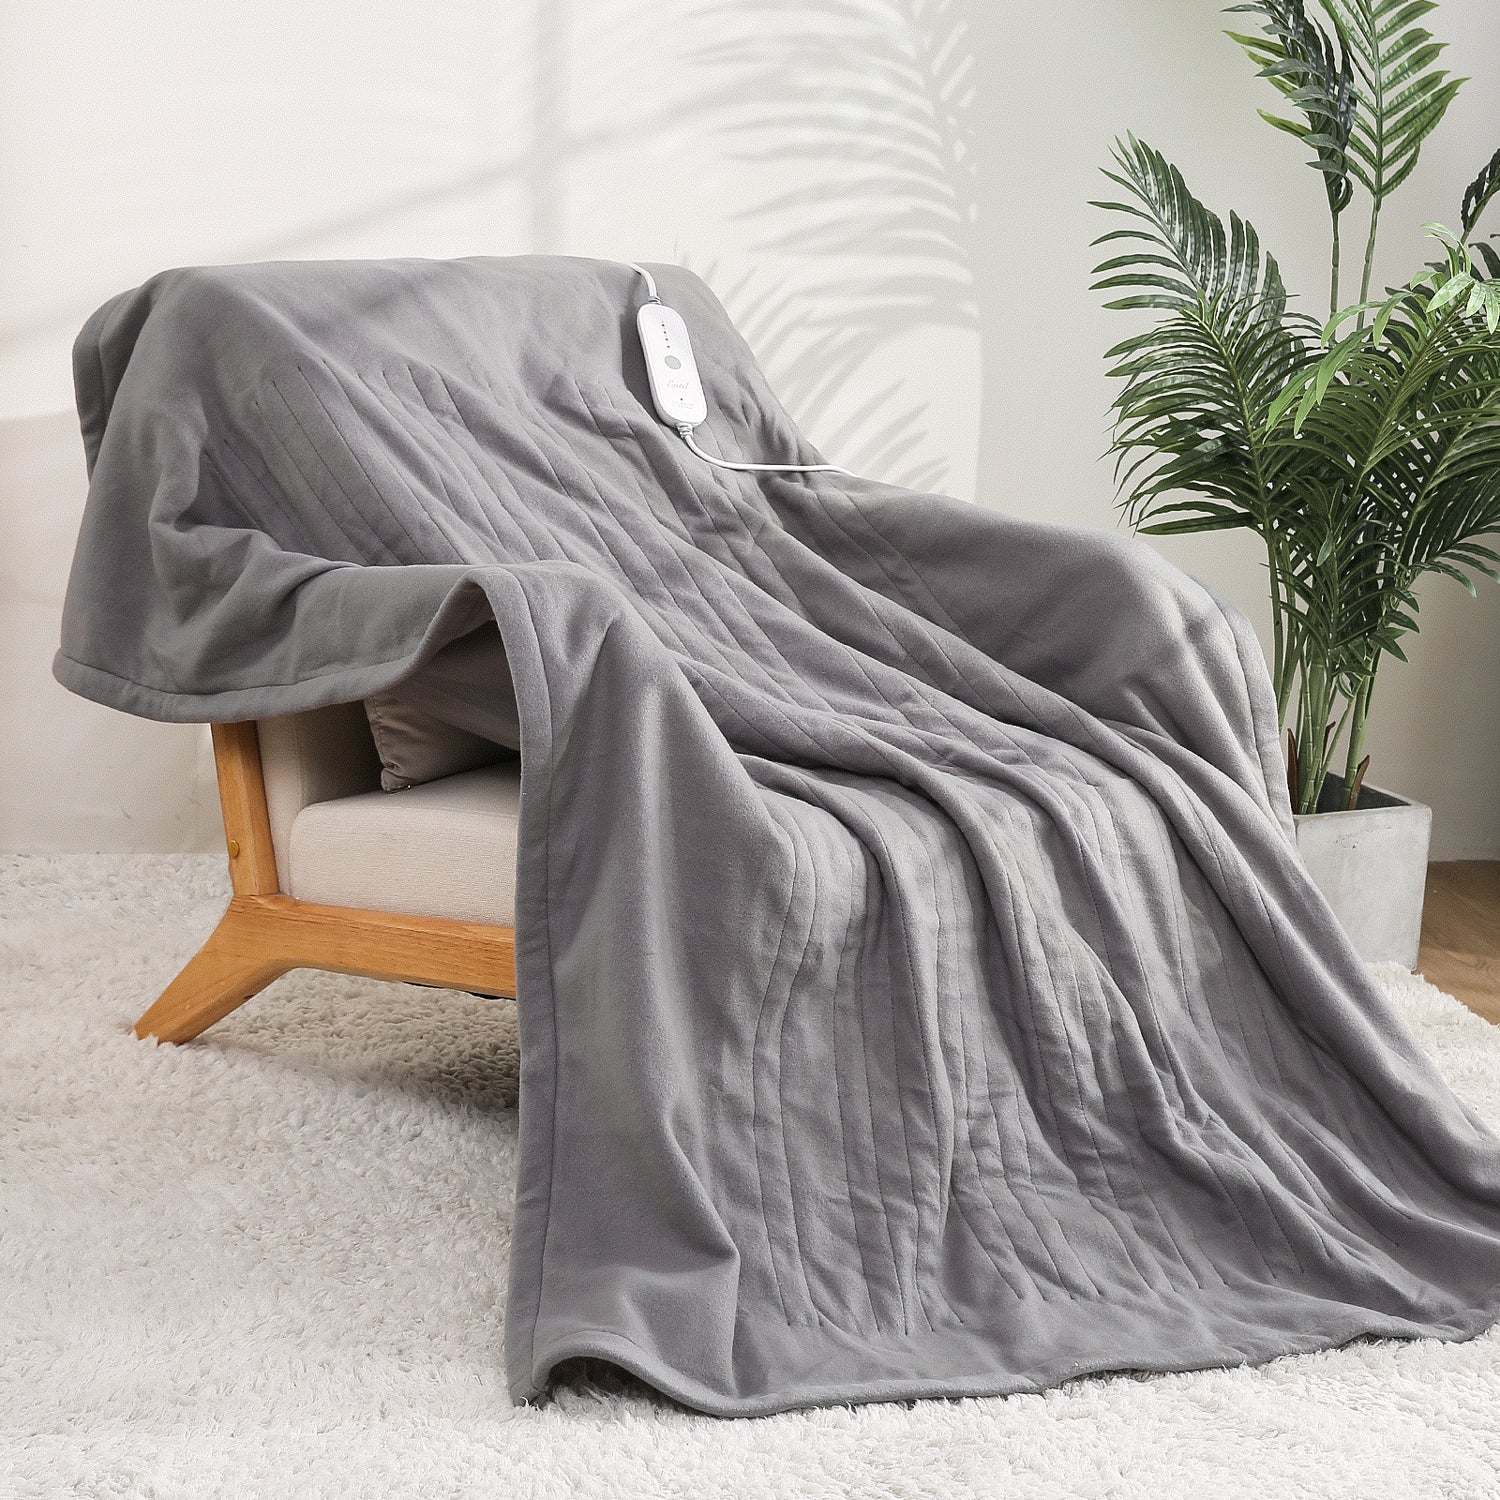 Load image into Gallery viewer, Electric Blanket 50x60inch Heated Throw Blanket with Adjustable Timer 4 Heating Levels, 6 Hours Auto-Off, Machine-Washable, Grey
